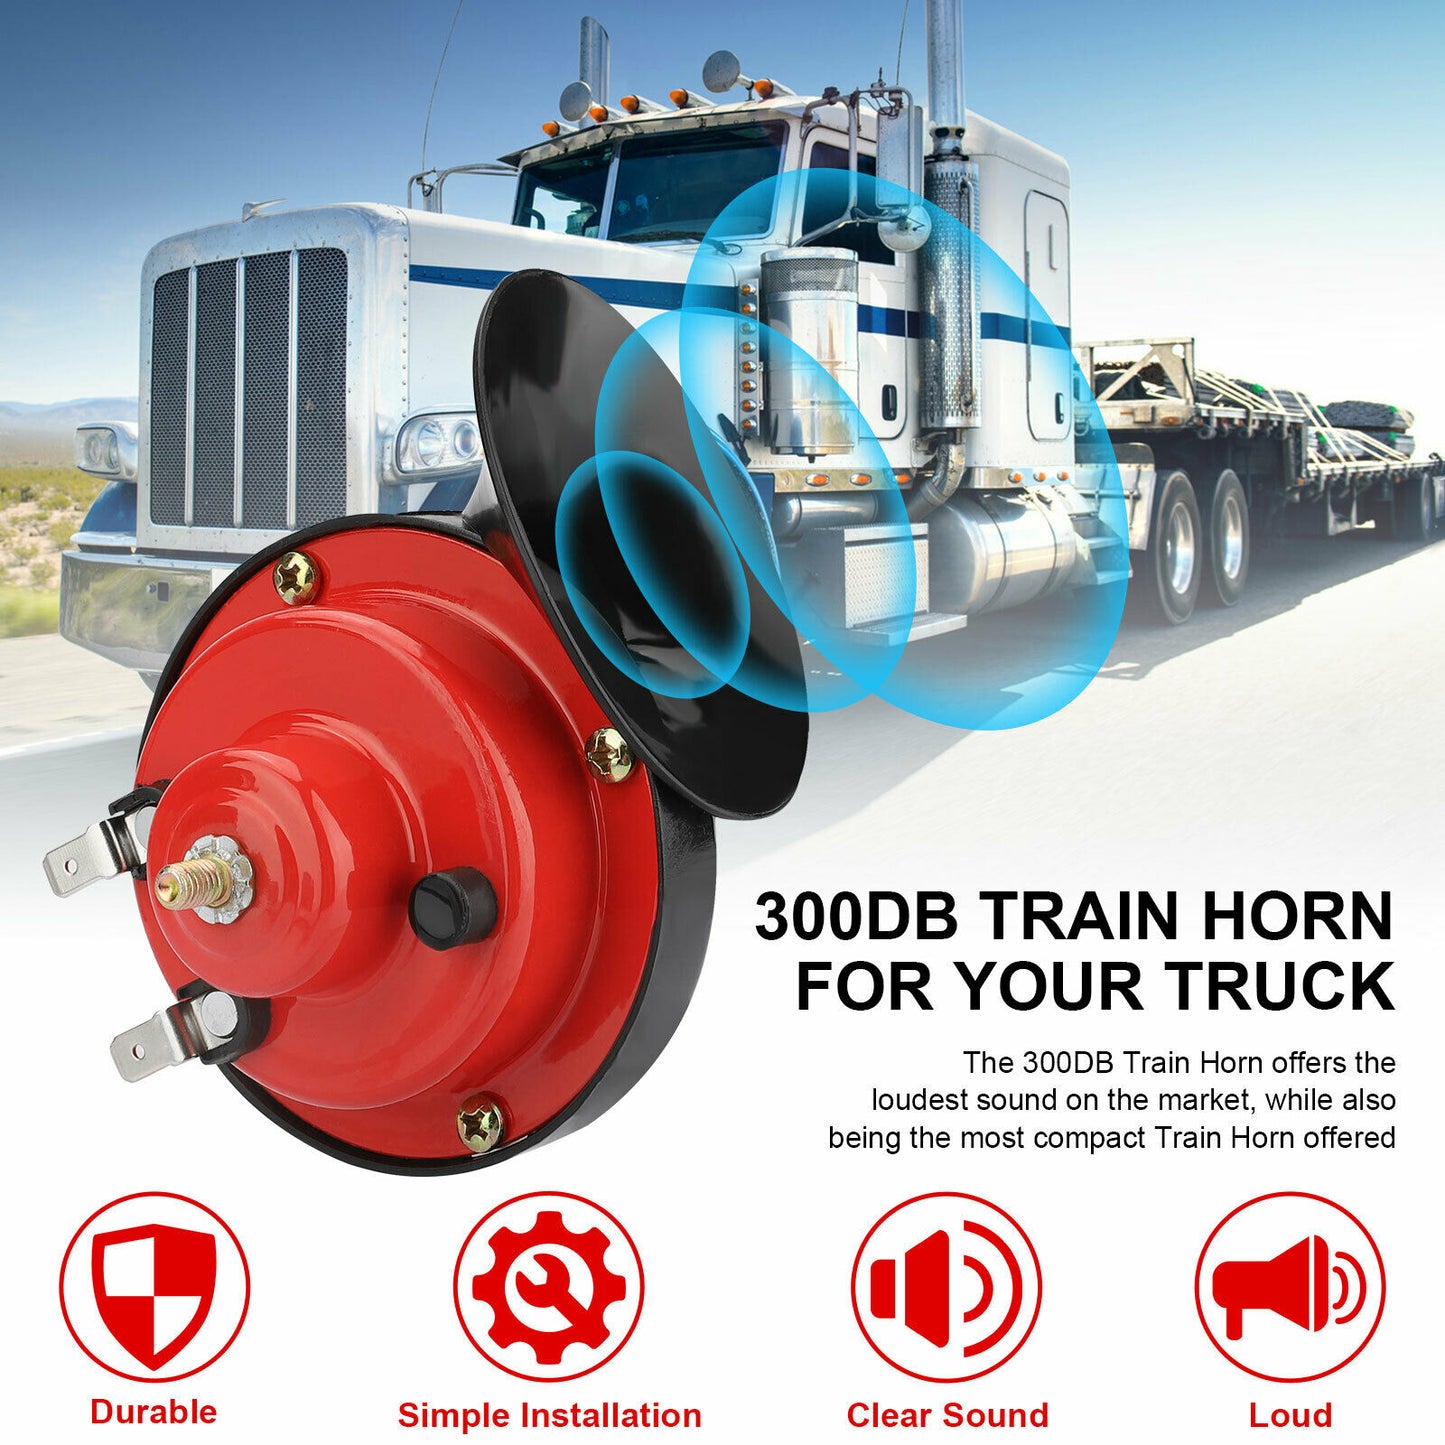 12V 300DB Super Loud Train Horn for Truck Waterproof for Motorcycle Car SUV Boat